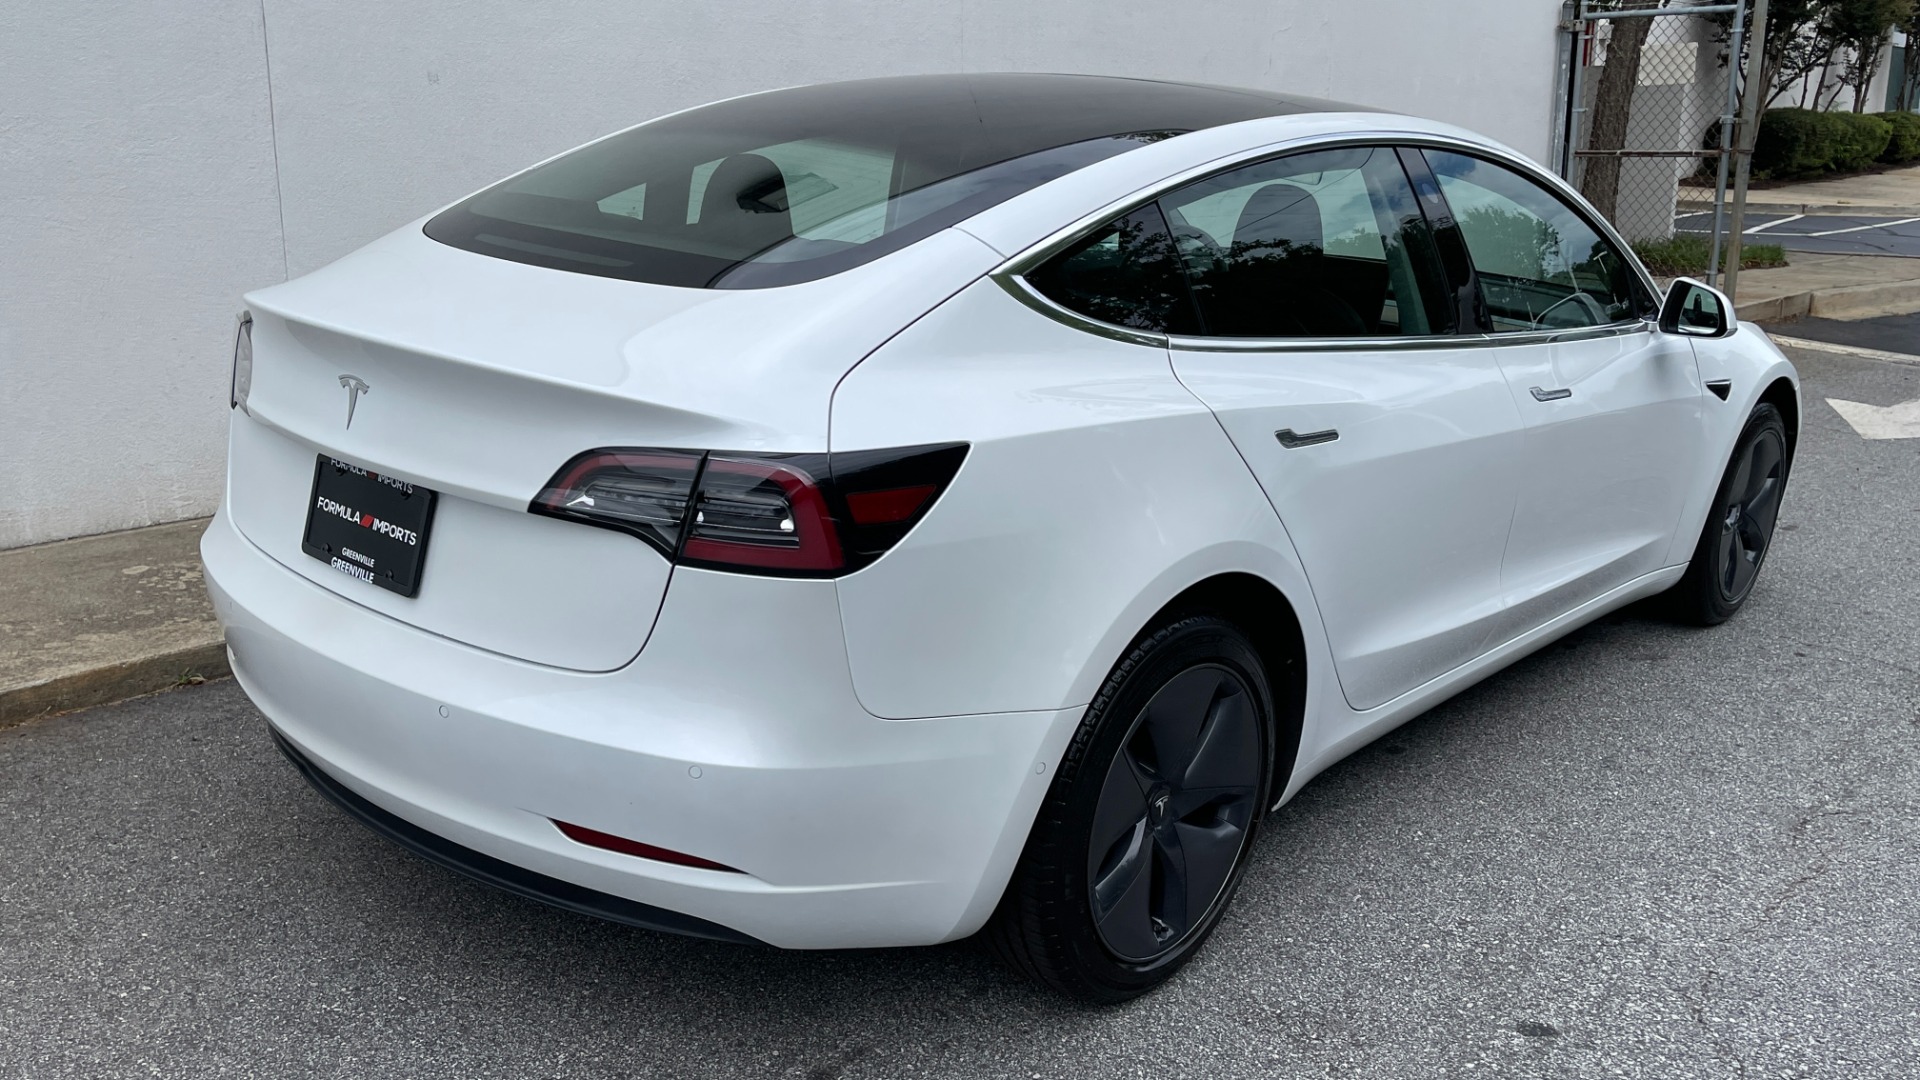 Used 2020 Tesla Model 3 STANDARD RANGE PLUS / AUTOPILOT / STANDARD CONNECTIVITY / PEARL WHITE for sale $46,995 at Formula Imports in Charlotte NC 28227 2